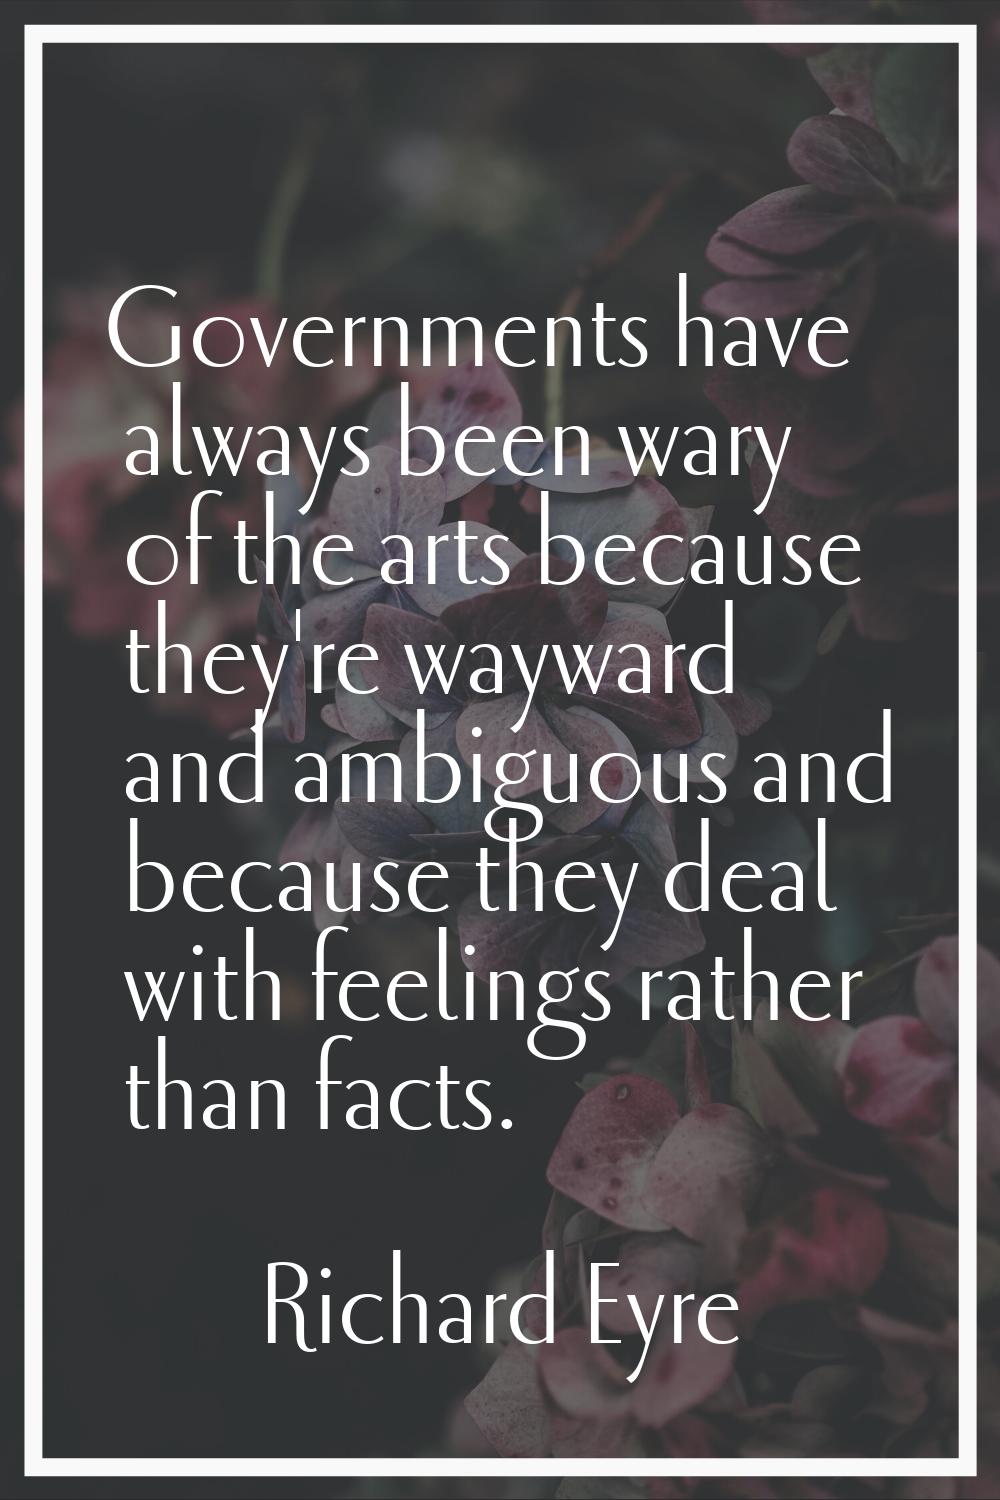 Governments have always been wary of the arts because they're wayward and ambiguous and because the